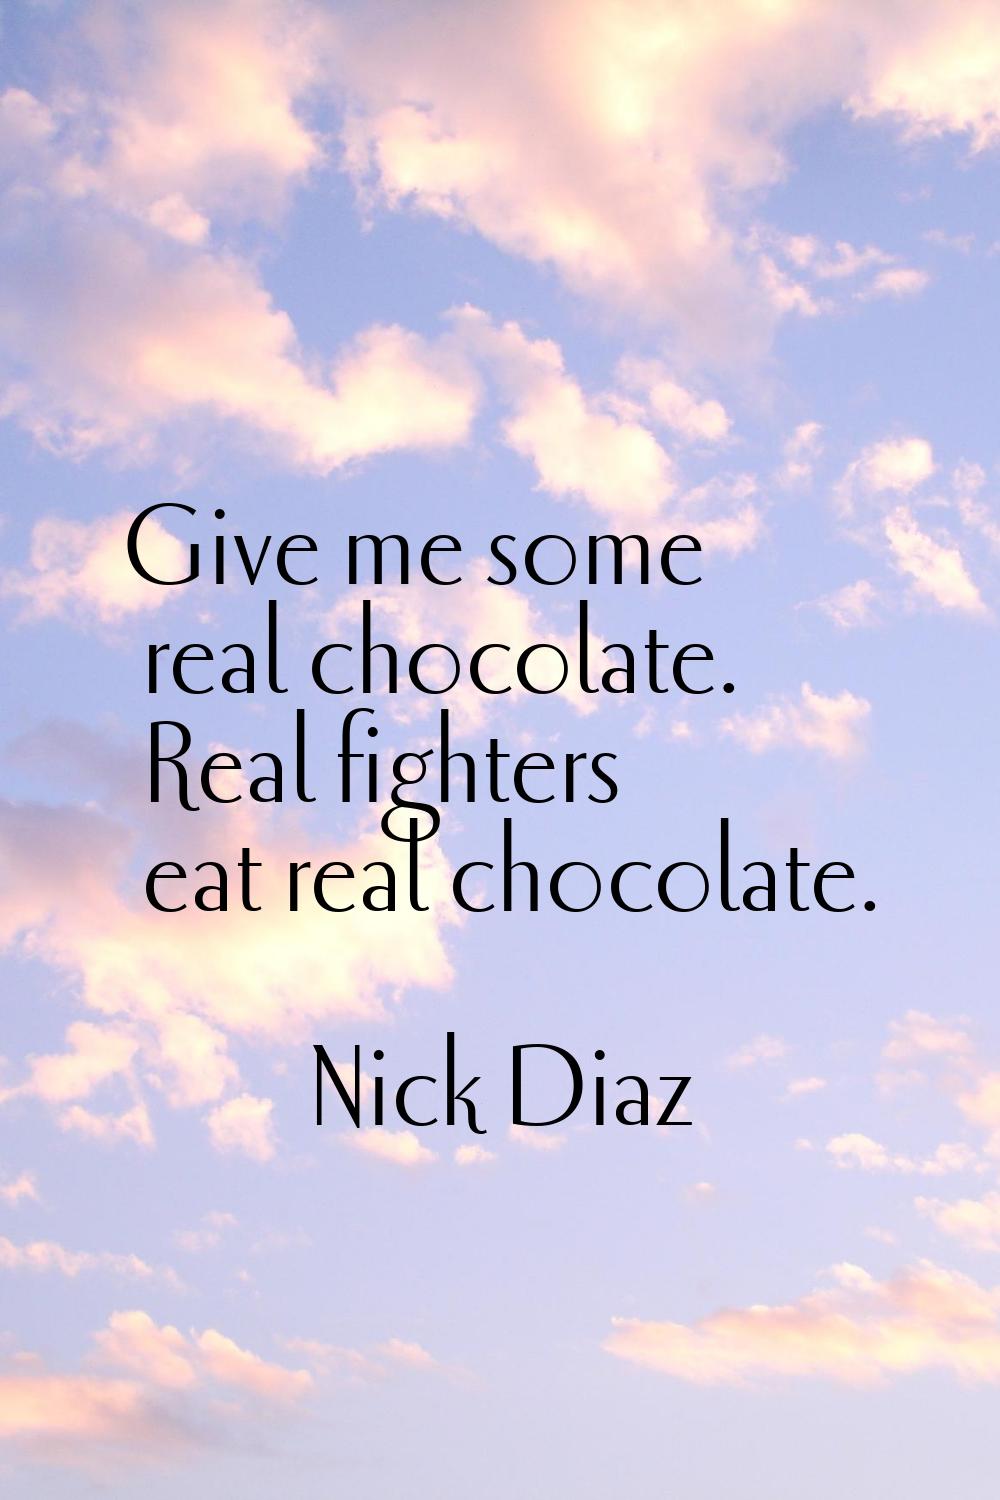 Give me some real chocolate. Real fighters eat real chocolate.